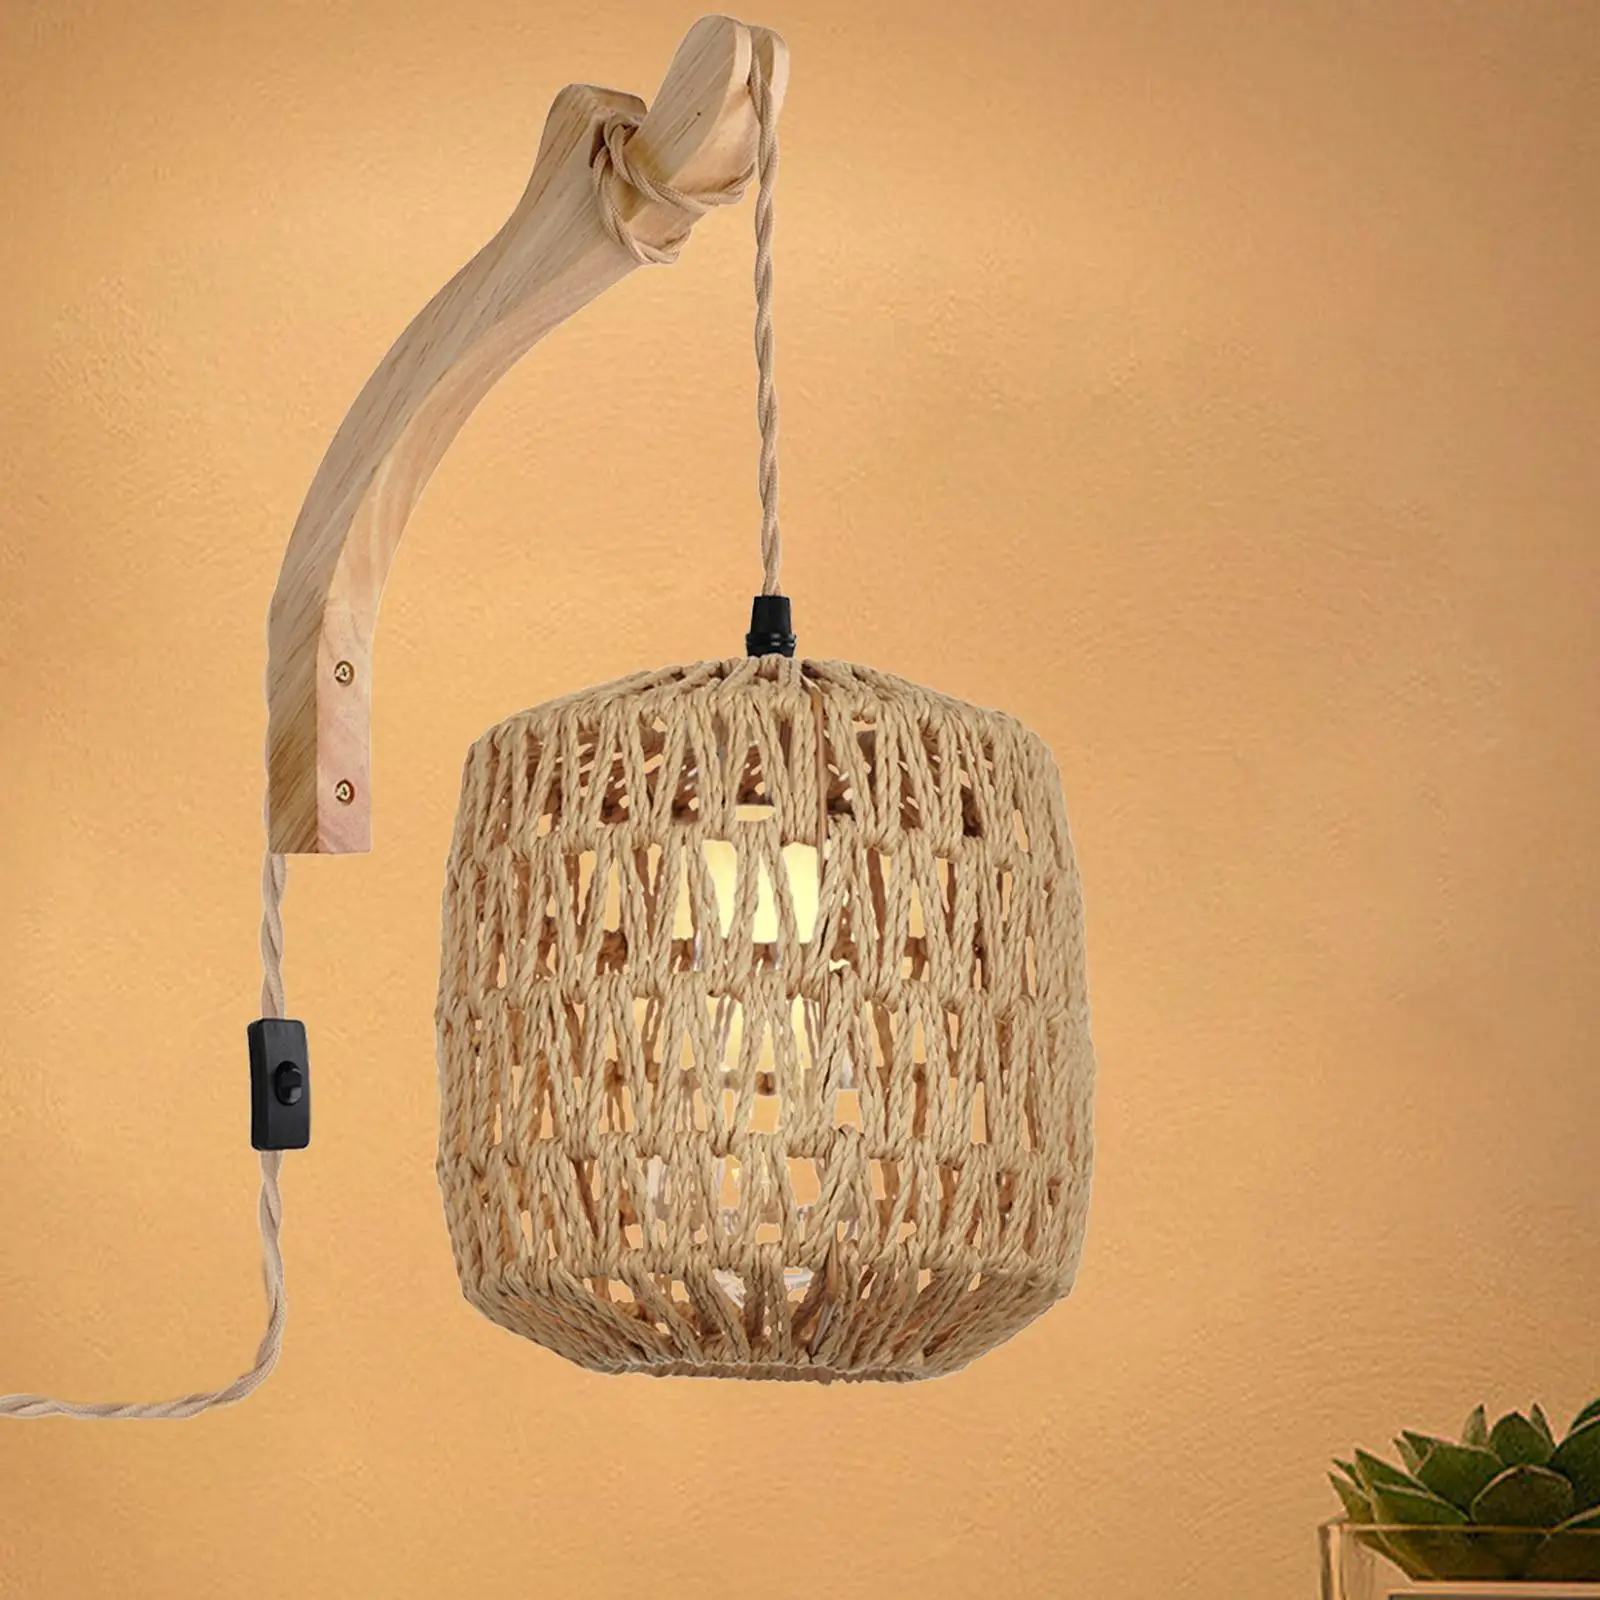 Wall Sconce Adjustable Cord Wall Mounted Lamp Boho Handwoven Lampshade Wall Lamp for Bedside Indoor Kitchen Island Office Porch